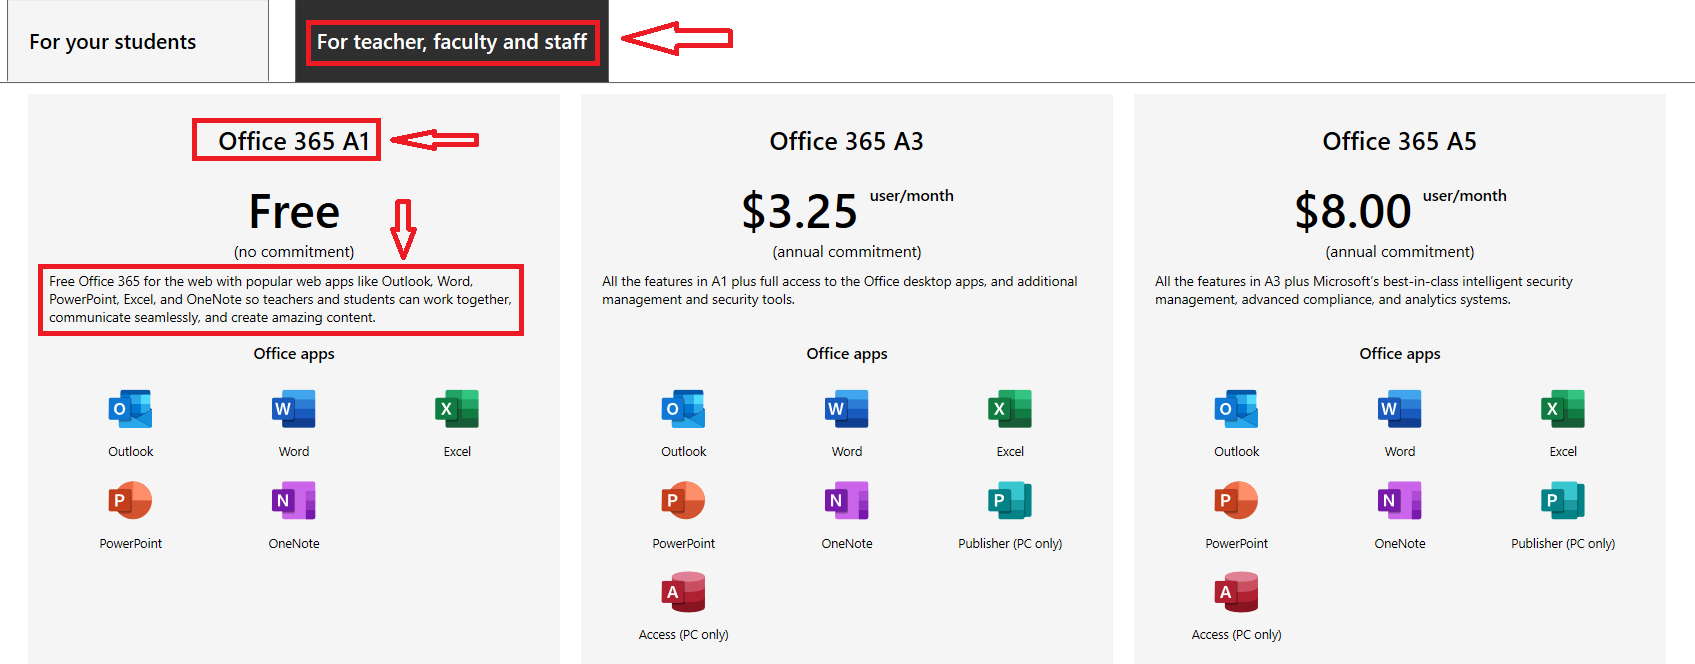 Cannot download Office 365 A1 for faculty - Microsoft Community